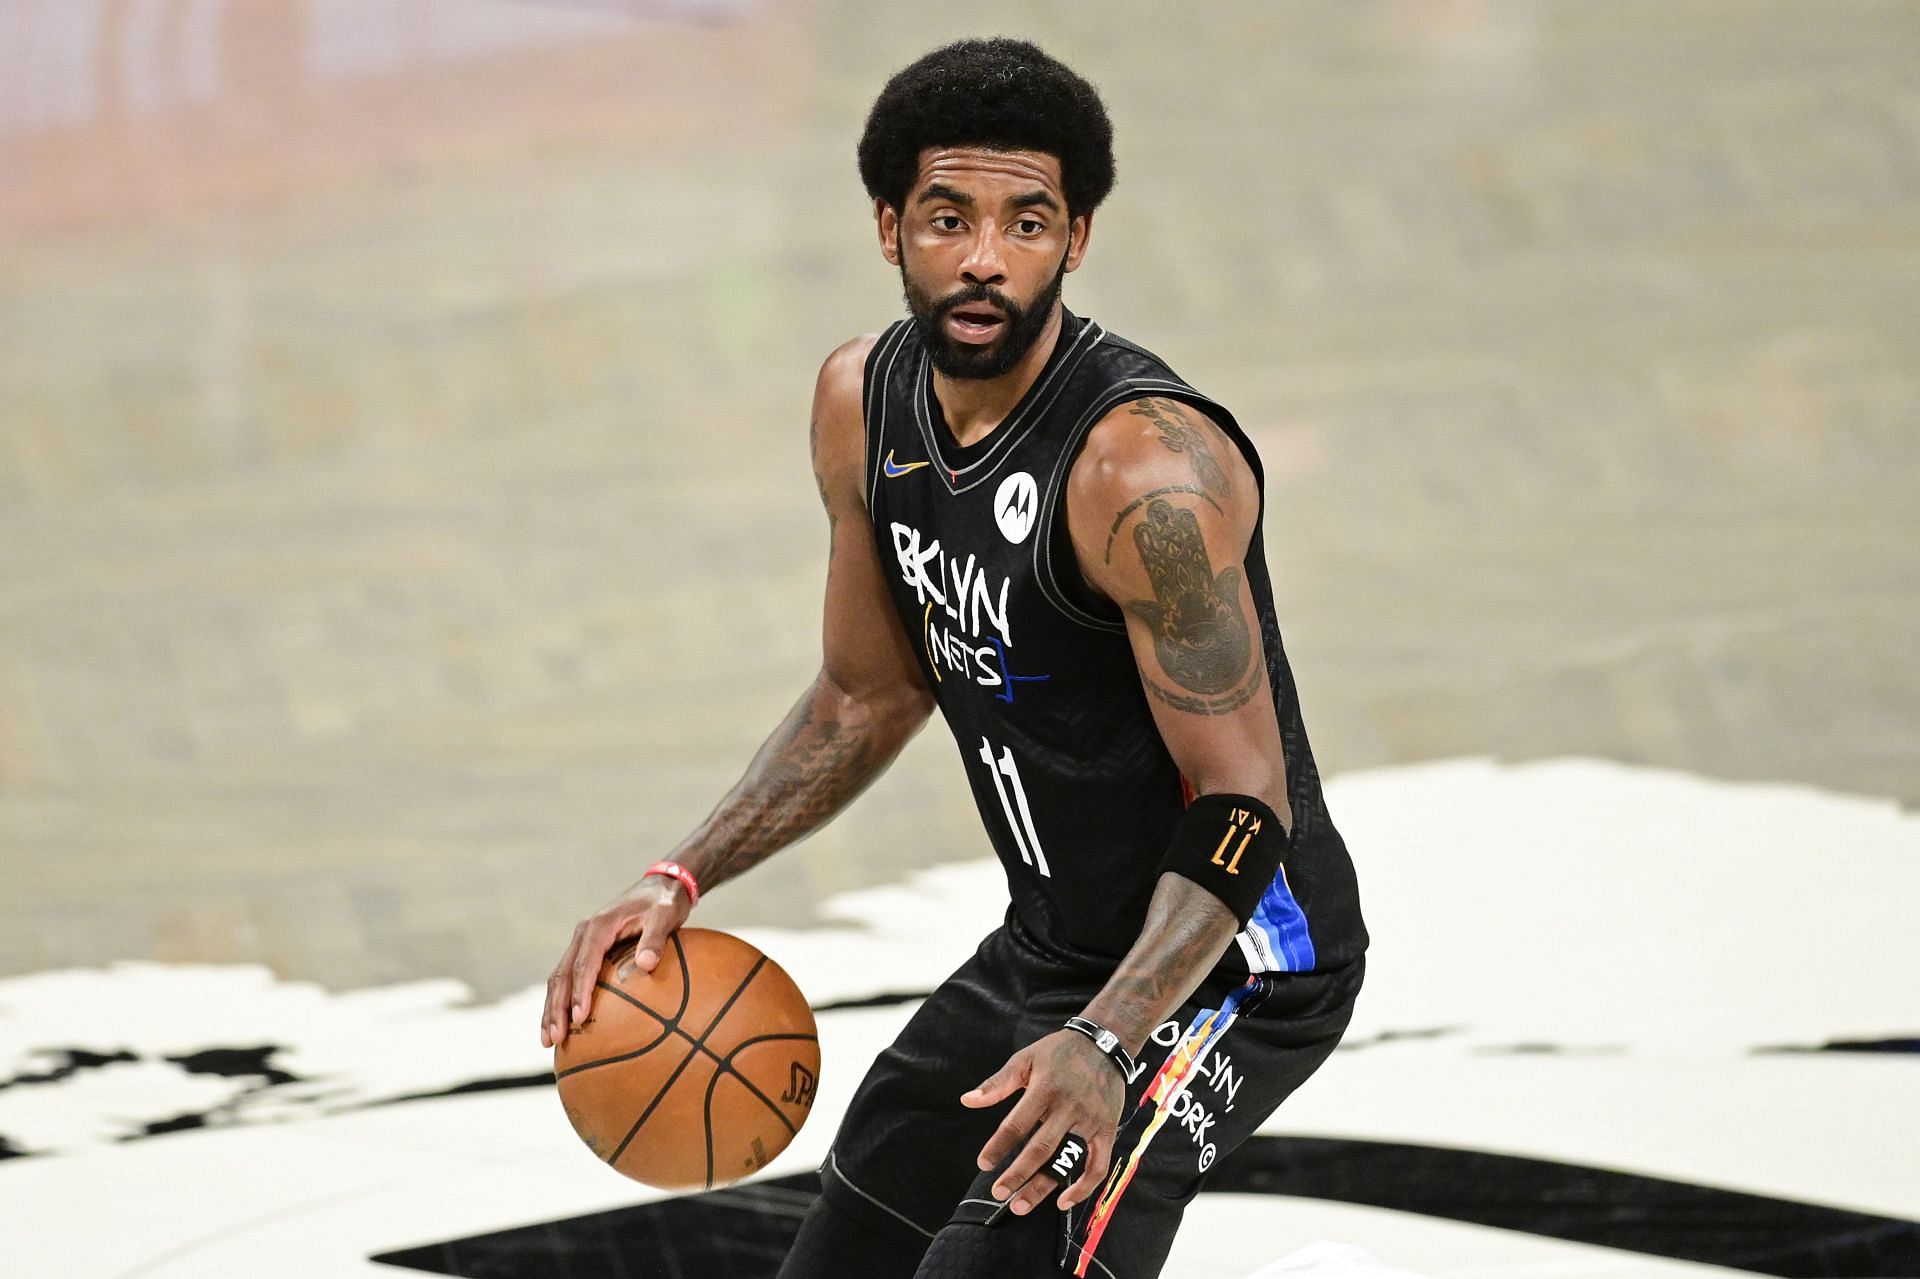 One season of great basketball may not be enough for the Brooklyn Nets or any team to trust the mercurial point guard. [Photo: New York Post]